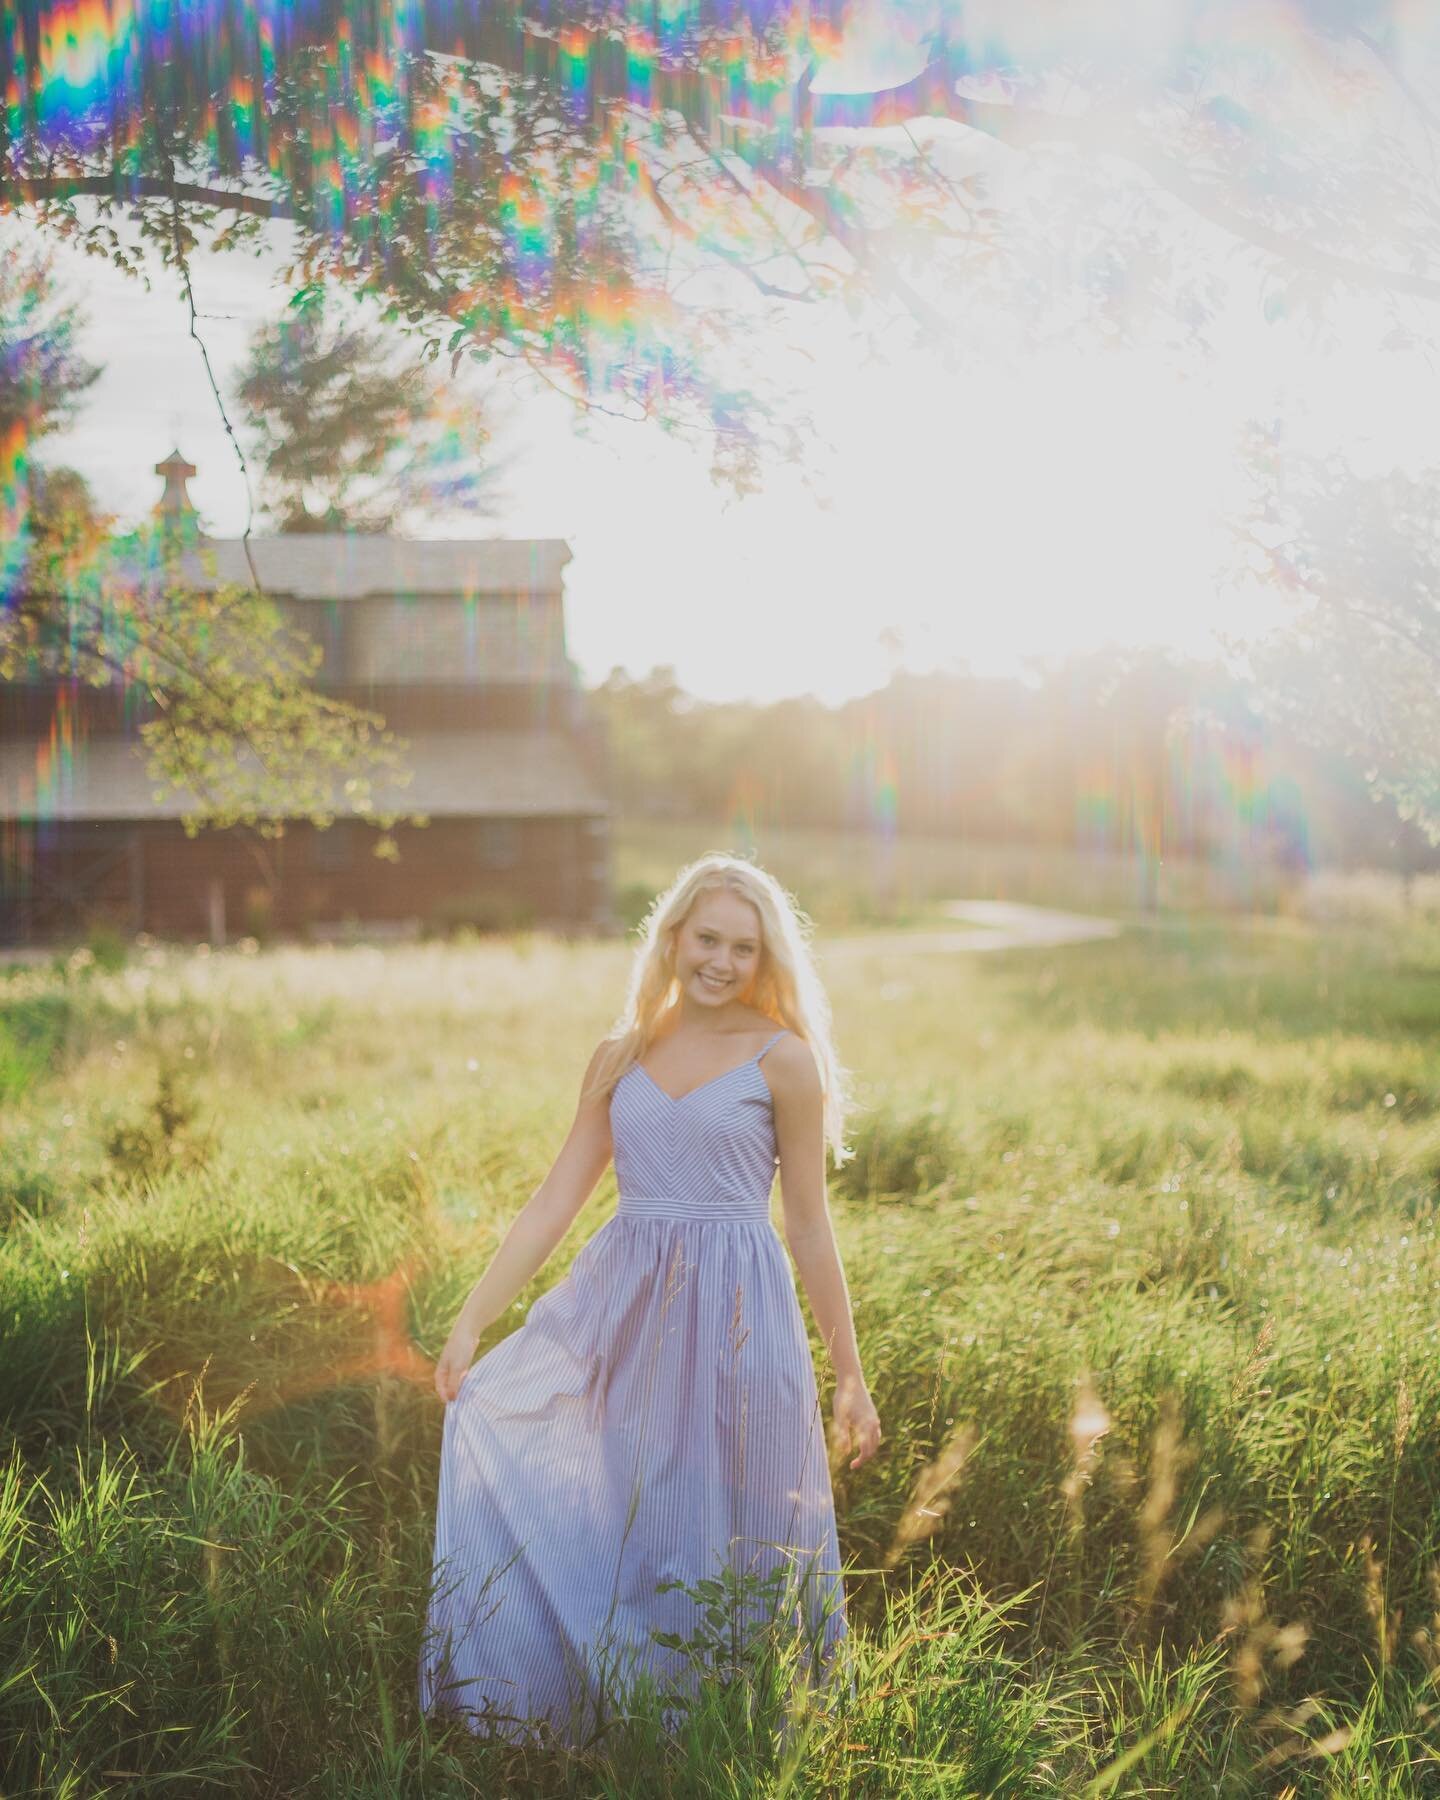 Golden hour came through for these pics ✨🌞🌼
&bull;
&bull;
&bull;
Shout out to Tatum for killing it in these pics! can&rsquo;t wait to share more photos from this session.